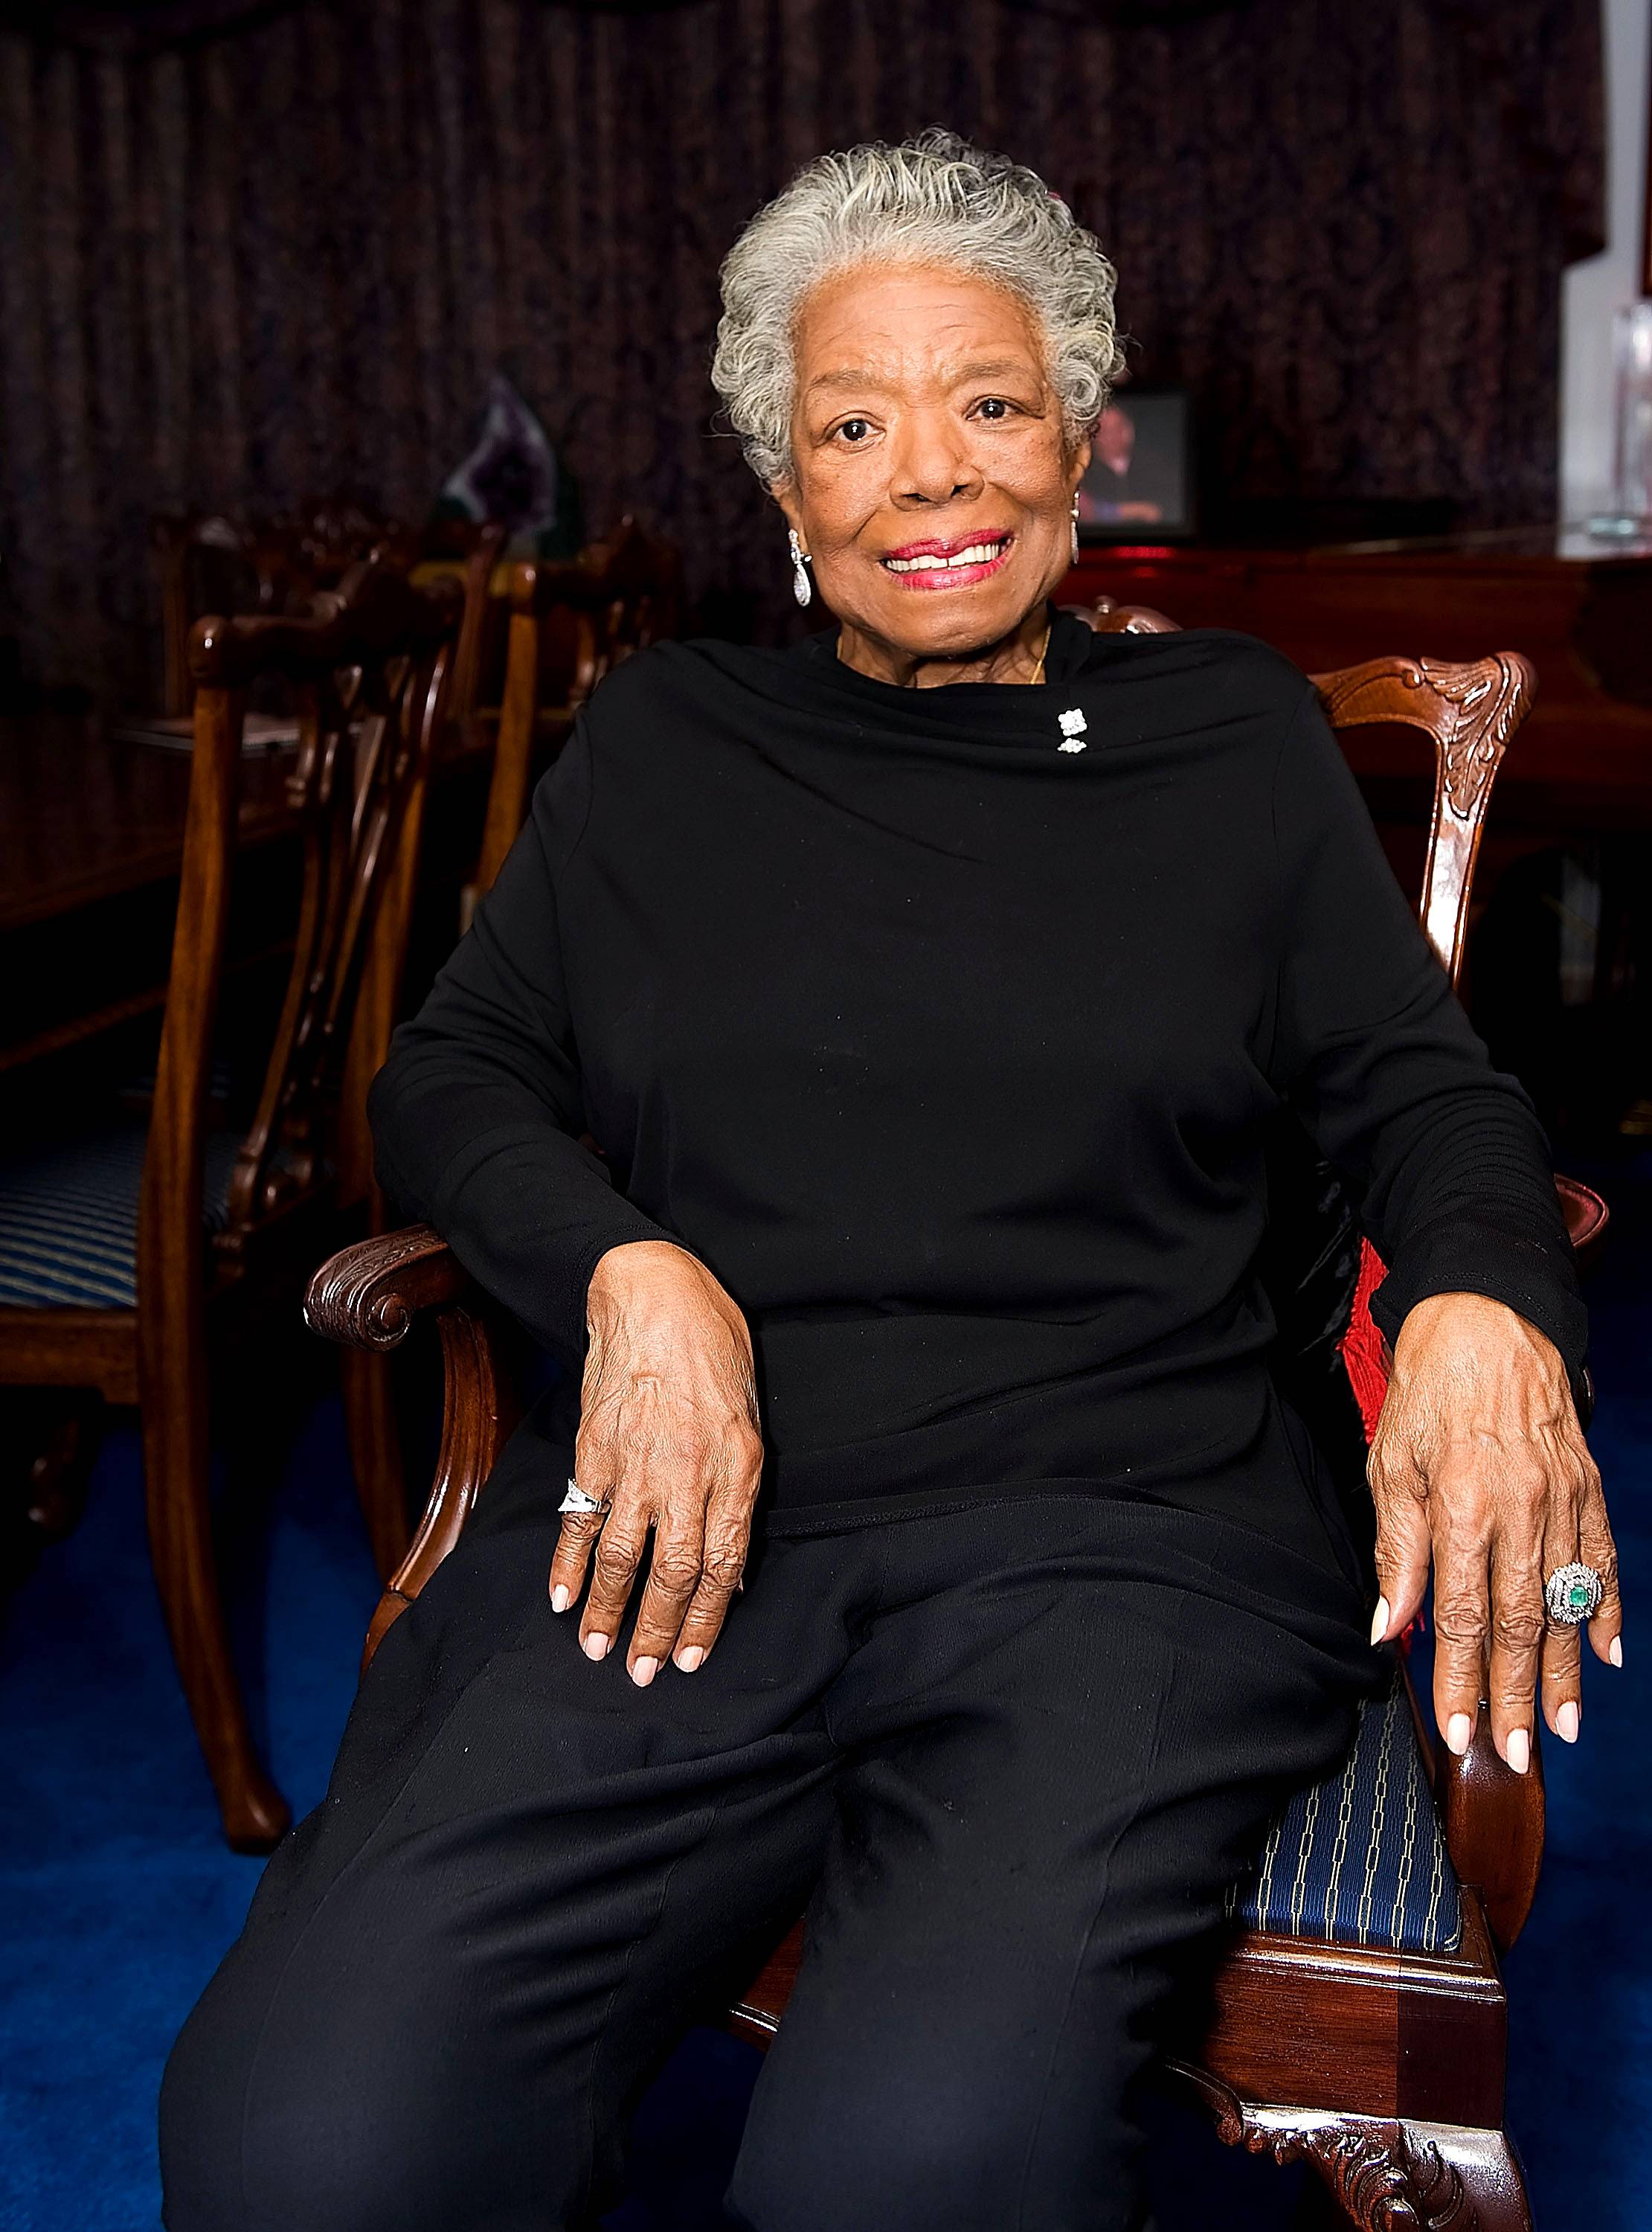 Maya Angelou - Considered one of the greatest poets of the 20th Century, Maya Angelou has made her presence known since the late 1950s. Her most popular body of work is I Know Why the Caged Bird Sings, an autobiographical depiction of Angelou from age 3 to 17. &nbsp;(Photo: Ken Charnock/Getty Images)